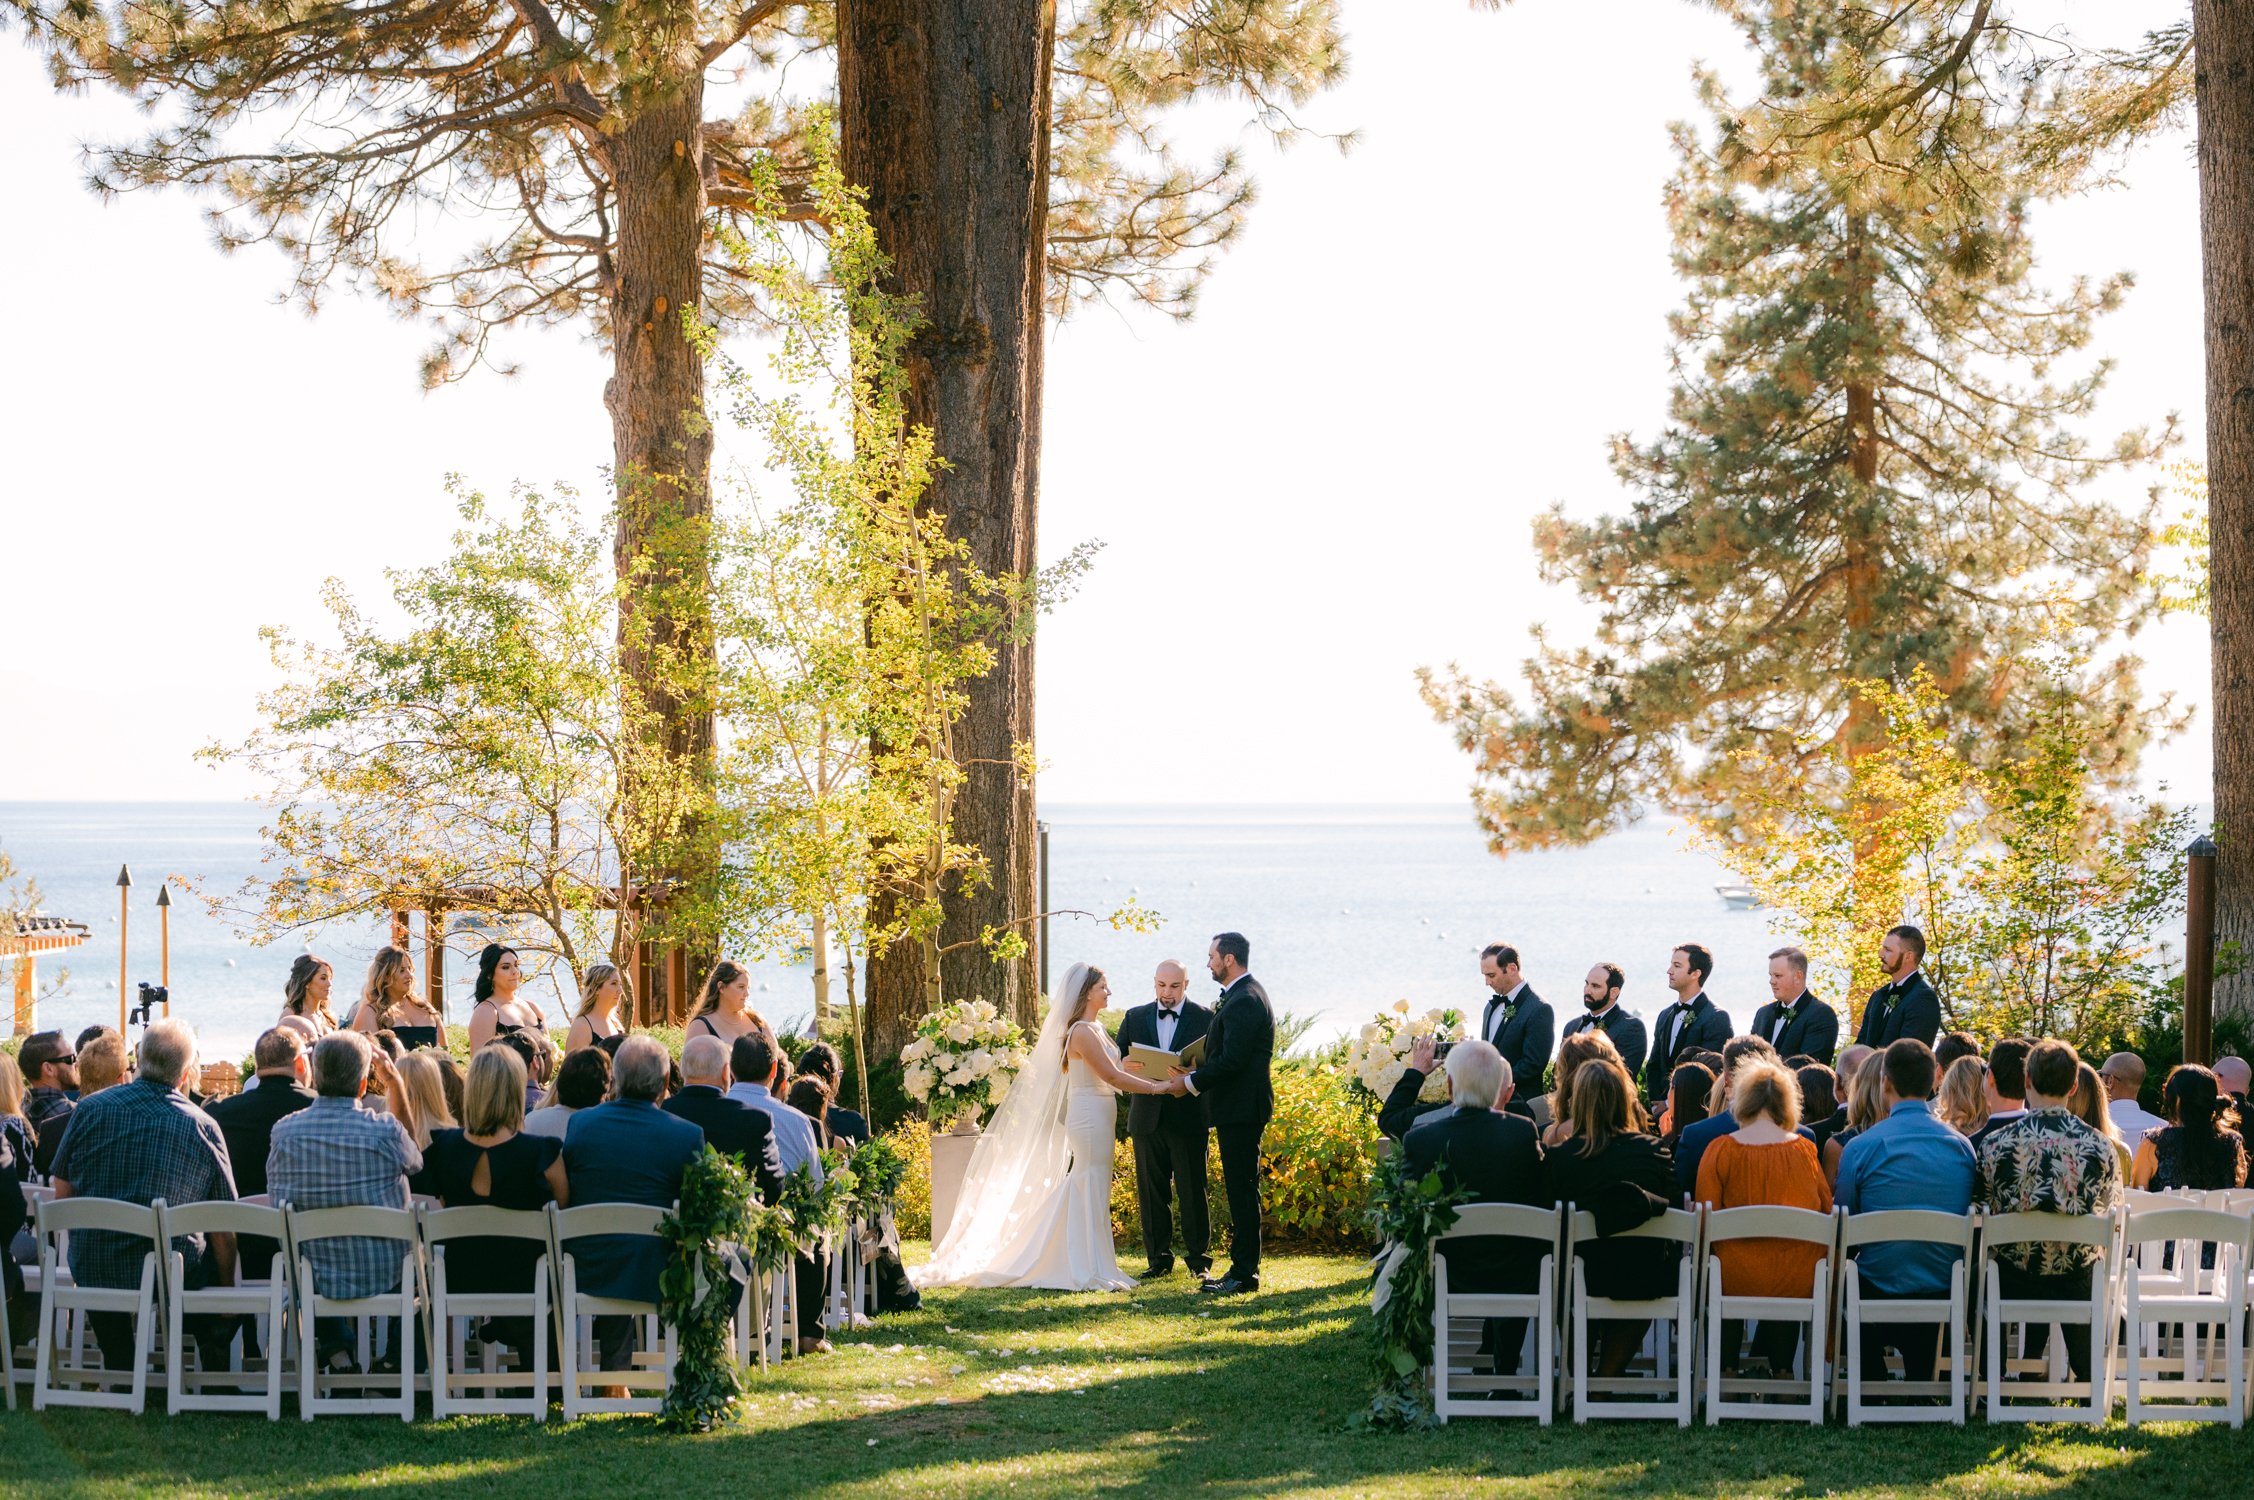 Hyatt Lake Tahoe wedding, photo of outdoor ceremony with the lake in the background